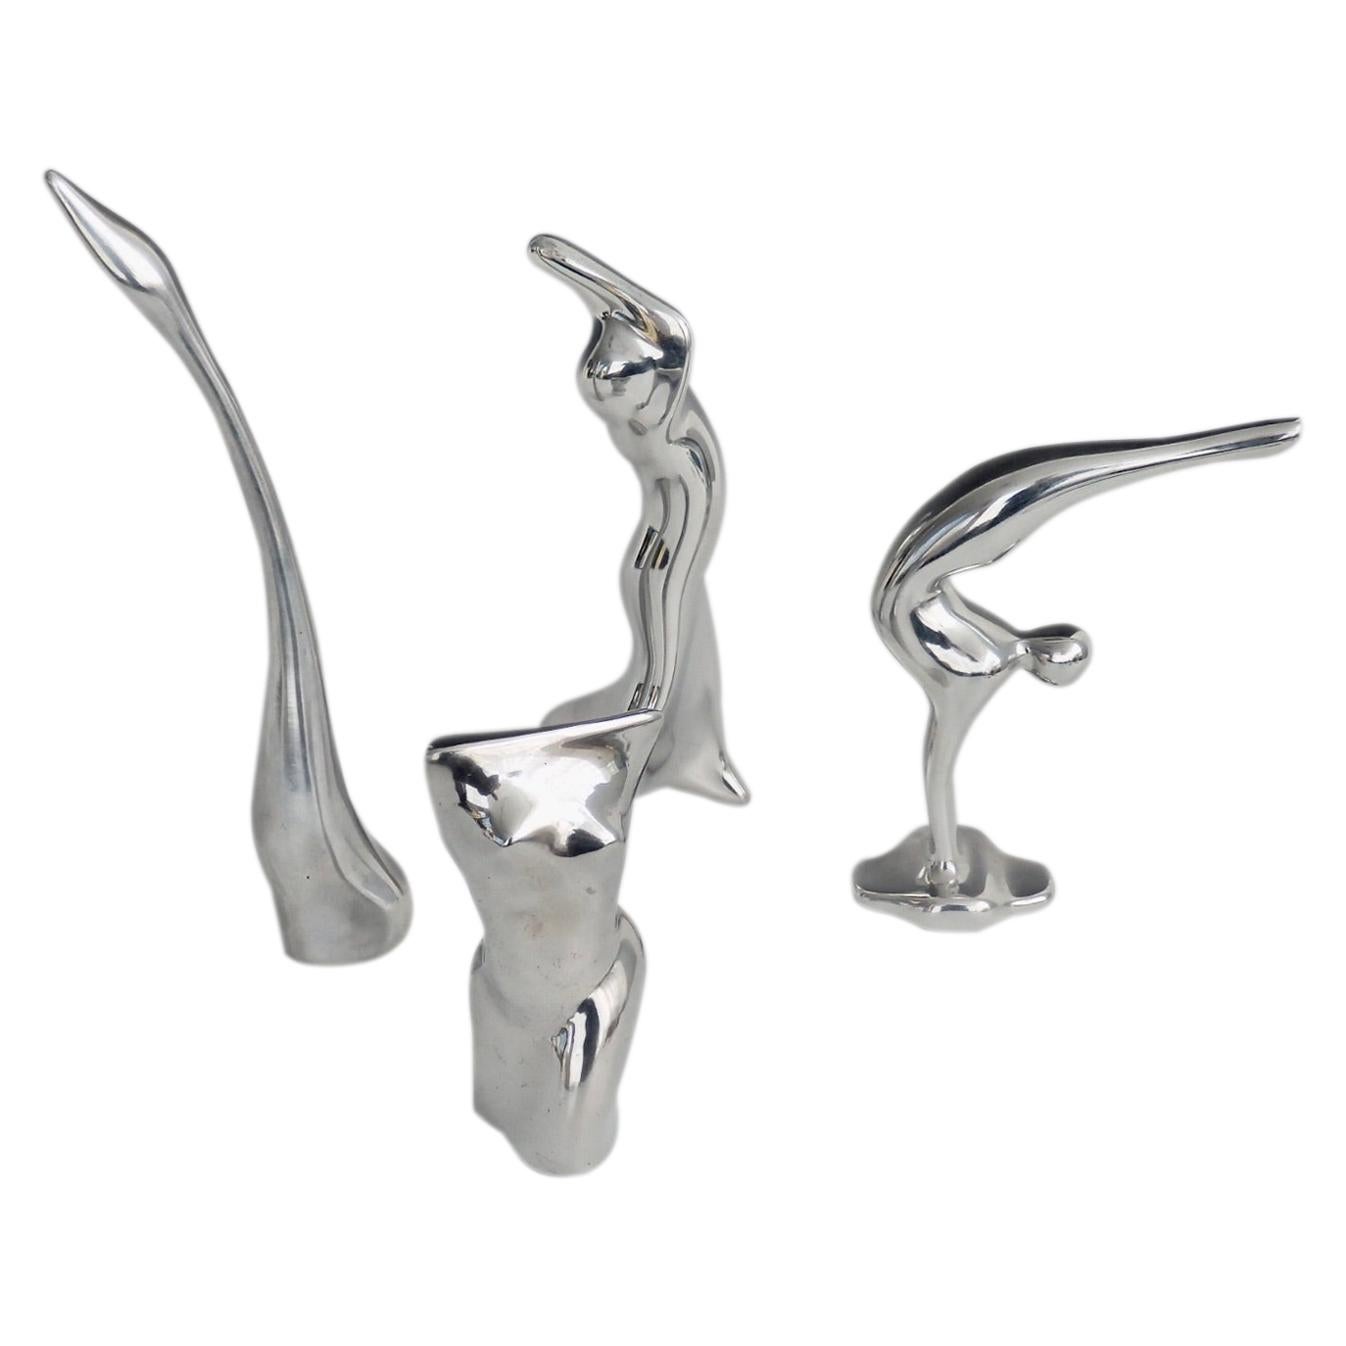 Four Piece Collection of Polished Aluminum Stylized Figures by Hoselton